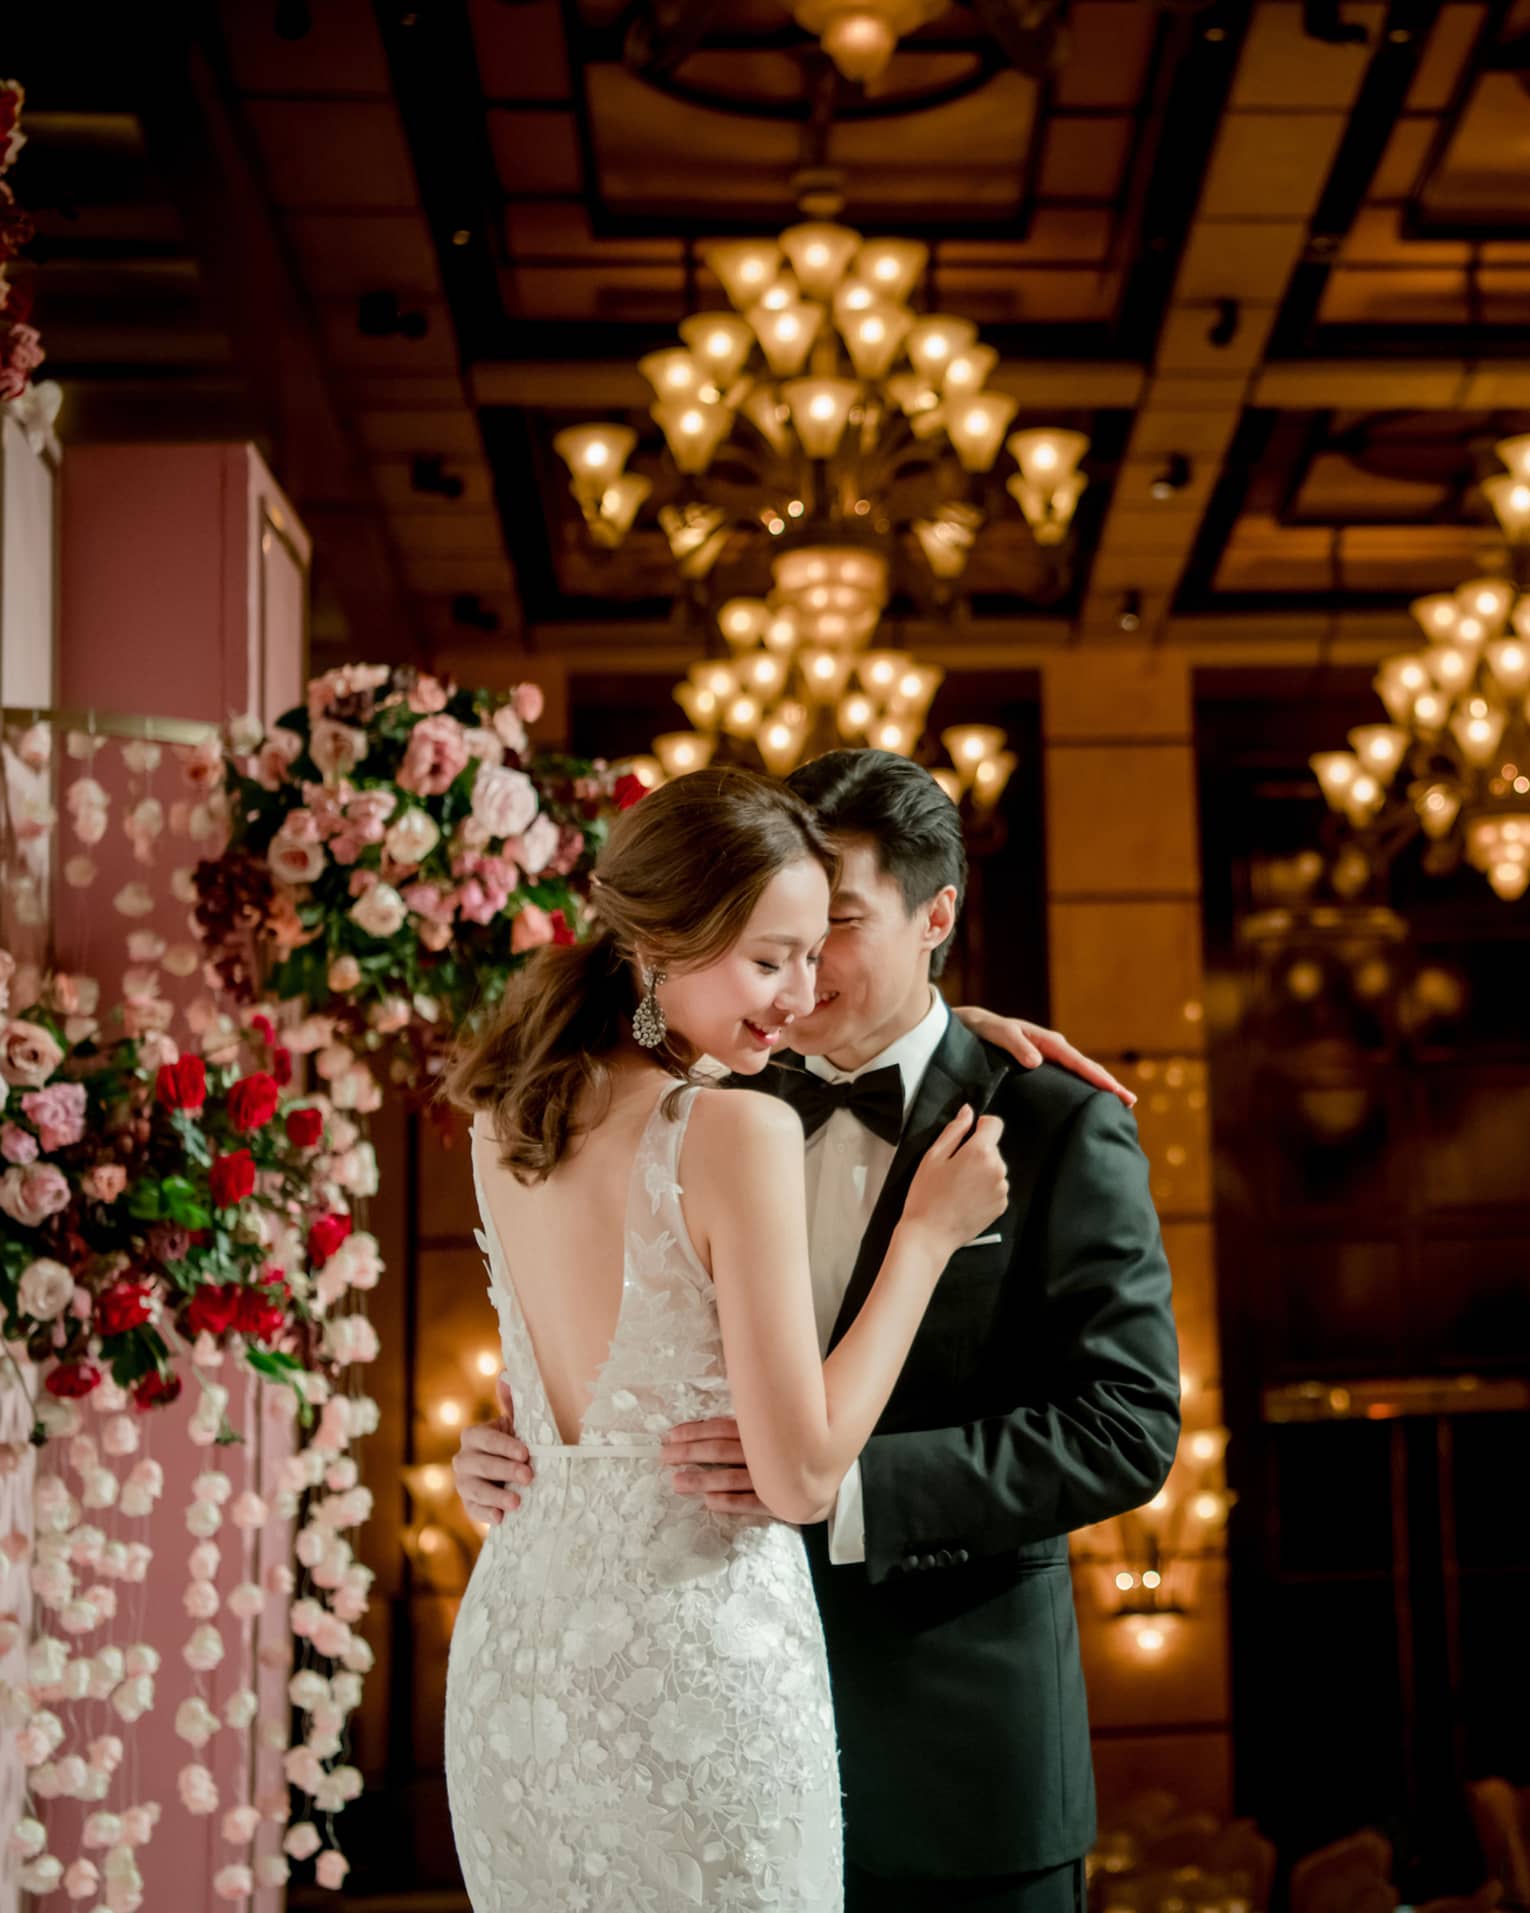 Bride and groom embrace at wedding ceremony in banquet room with lights